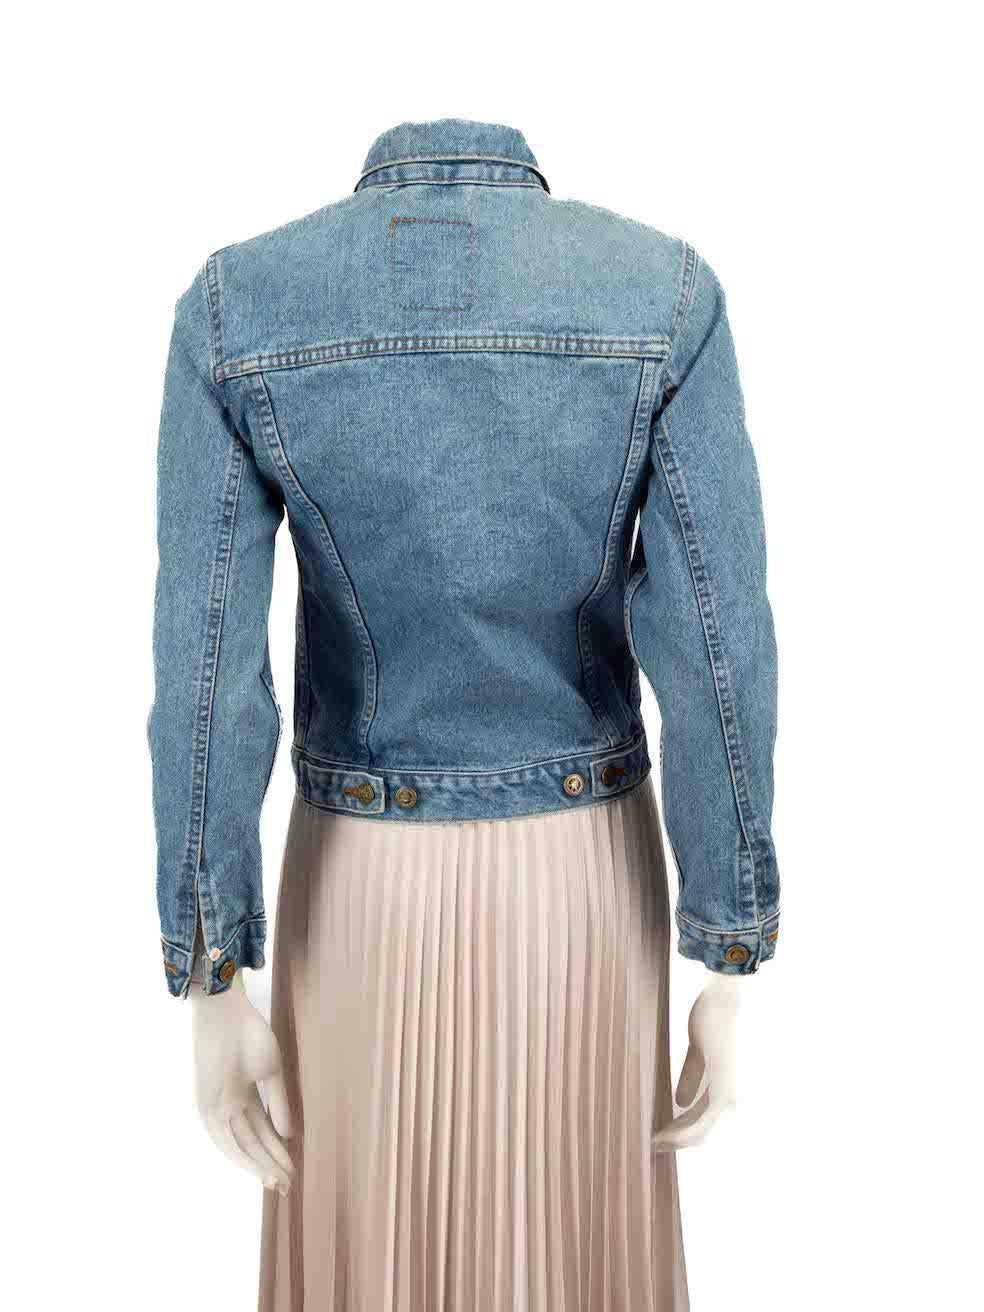 Moschino Blue Stone Washed Denim Jacket Size S In Excellent Condition For Sale In London, GB